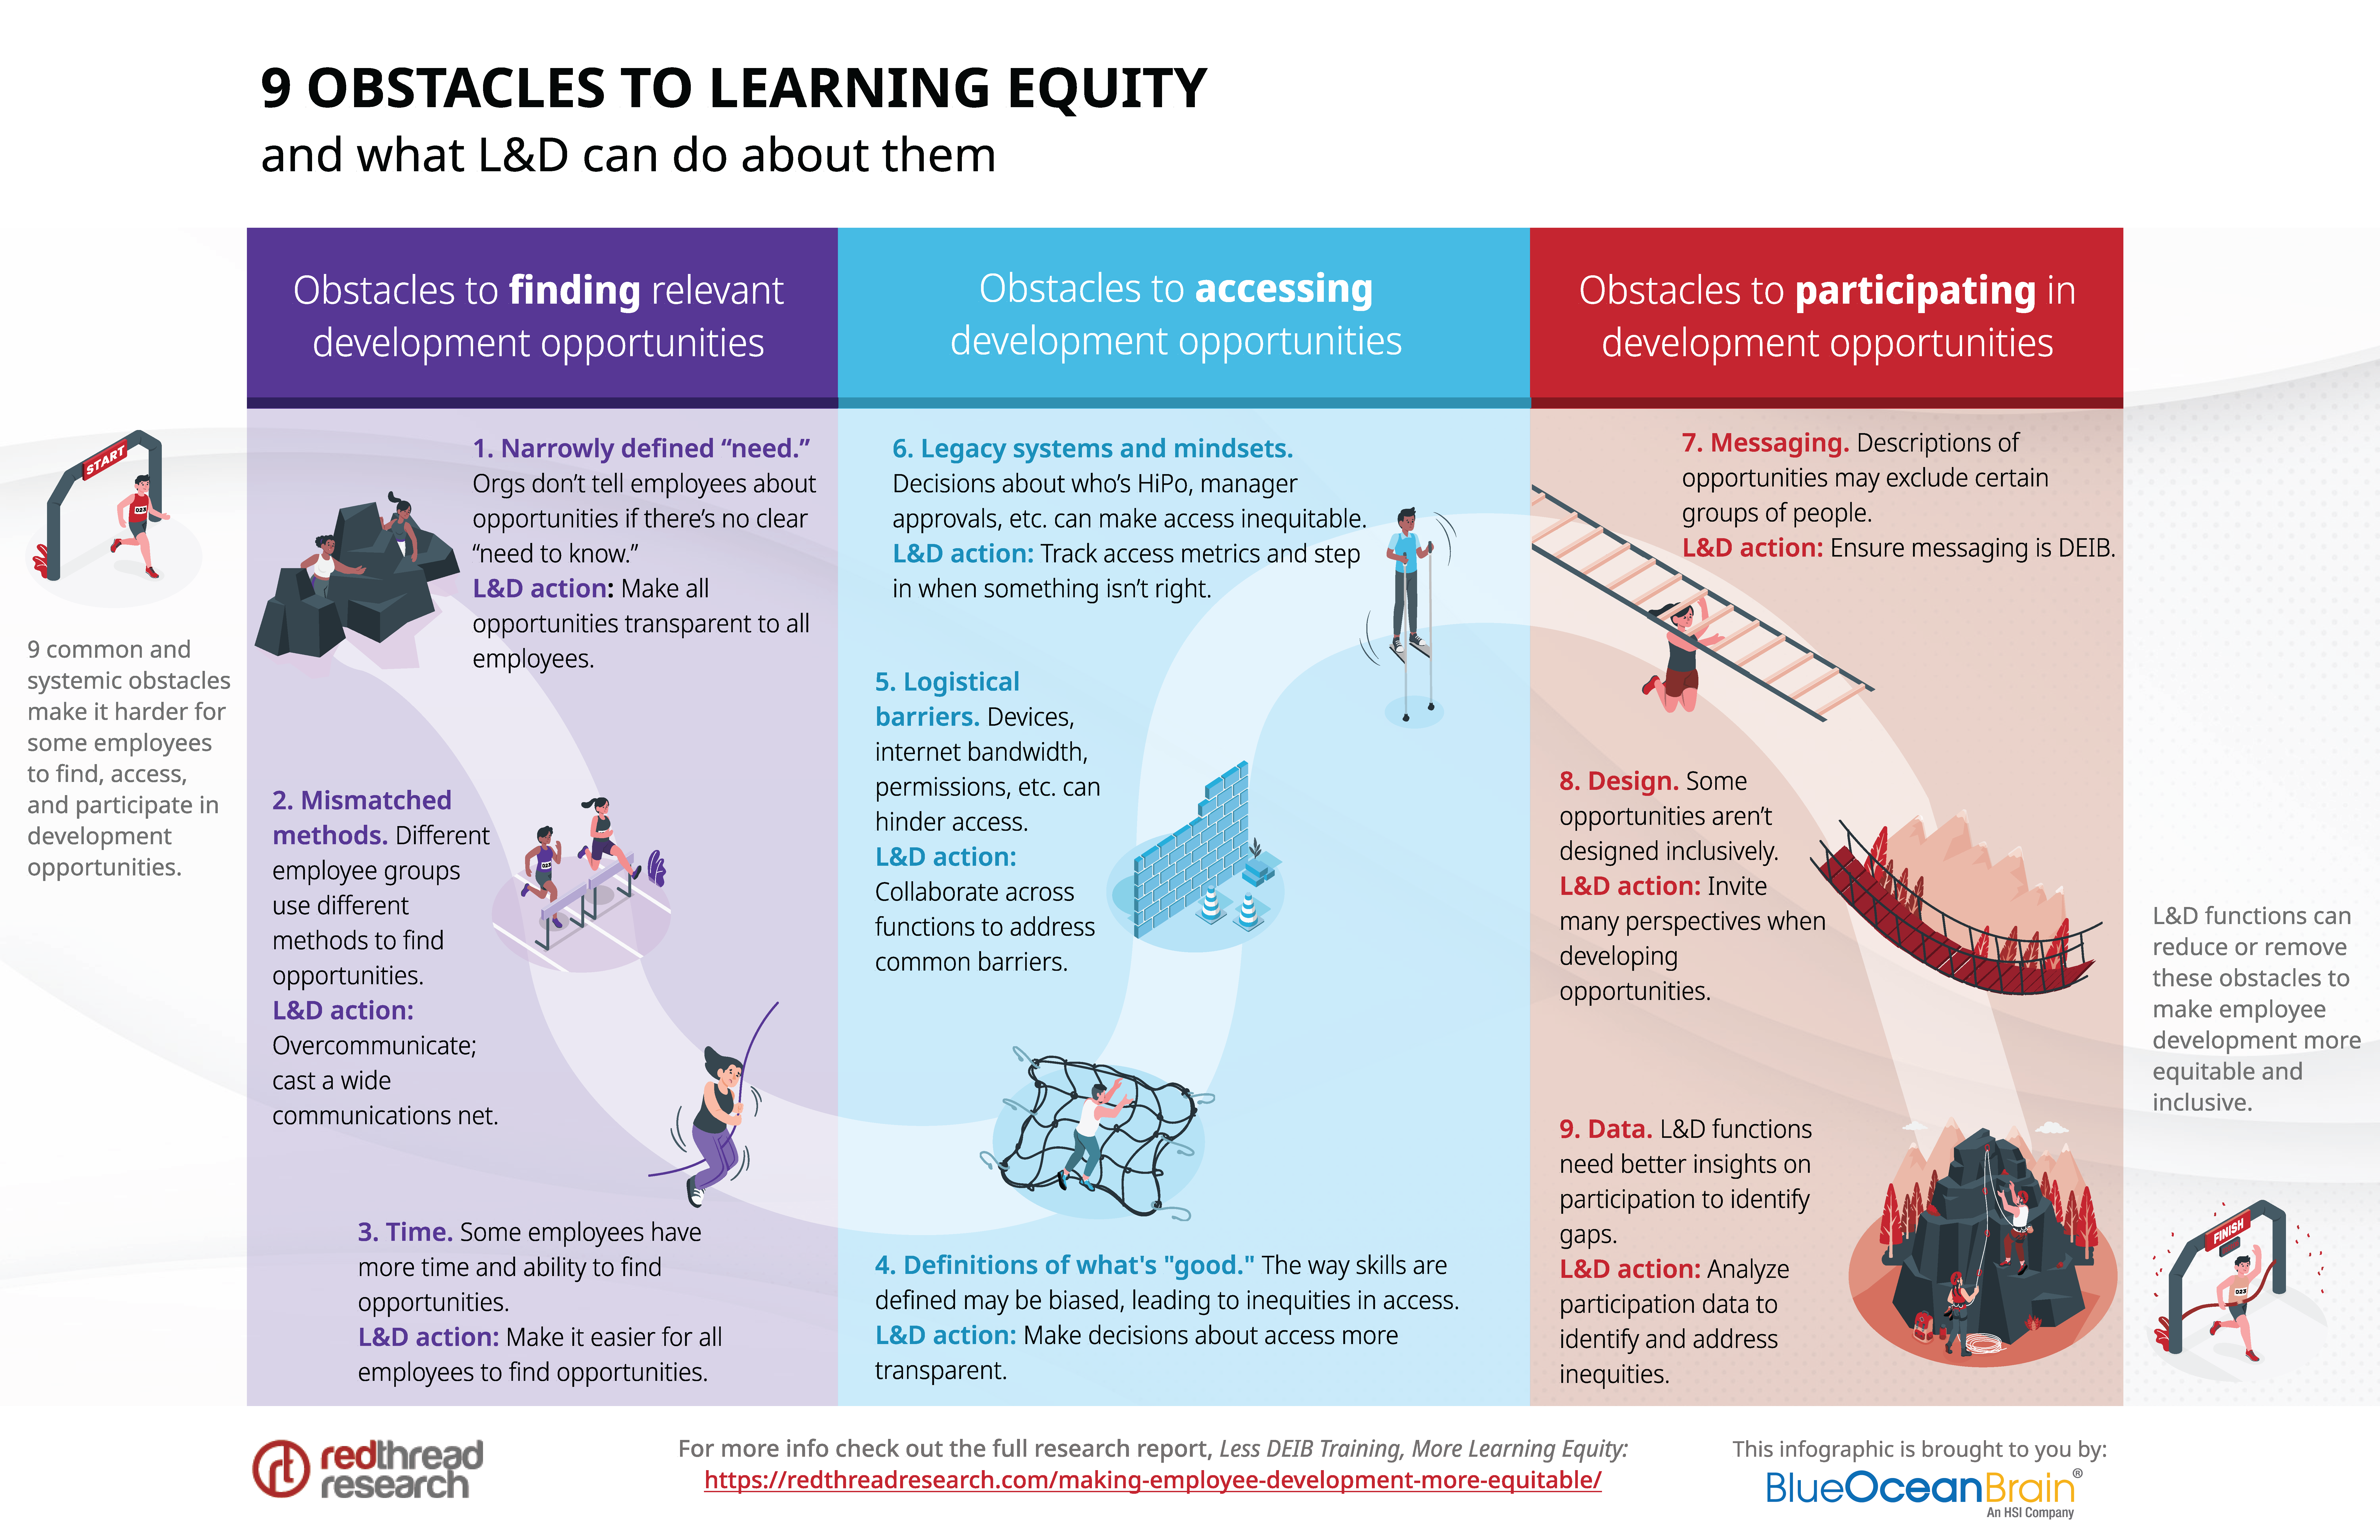 9 Obstacles to Learning Equity Infographic - BOB and RTR